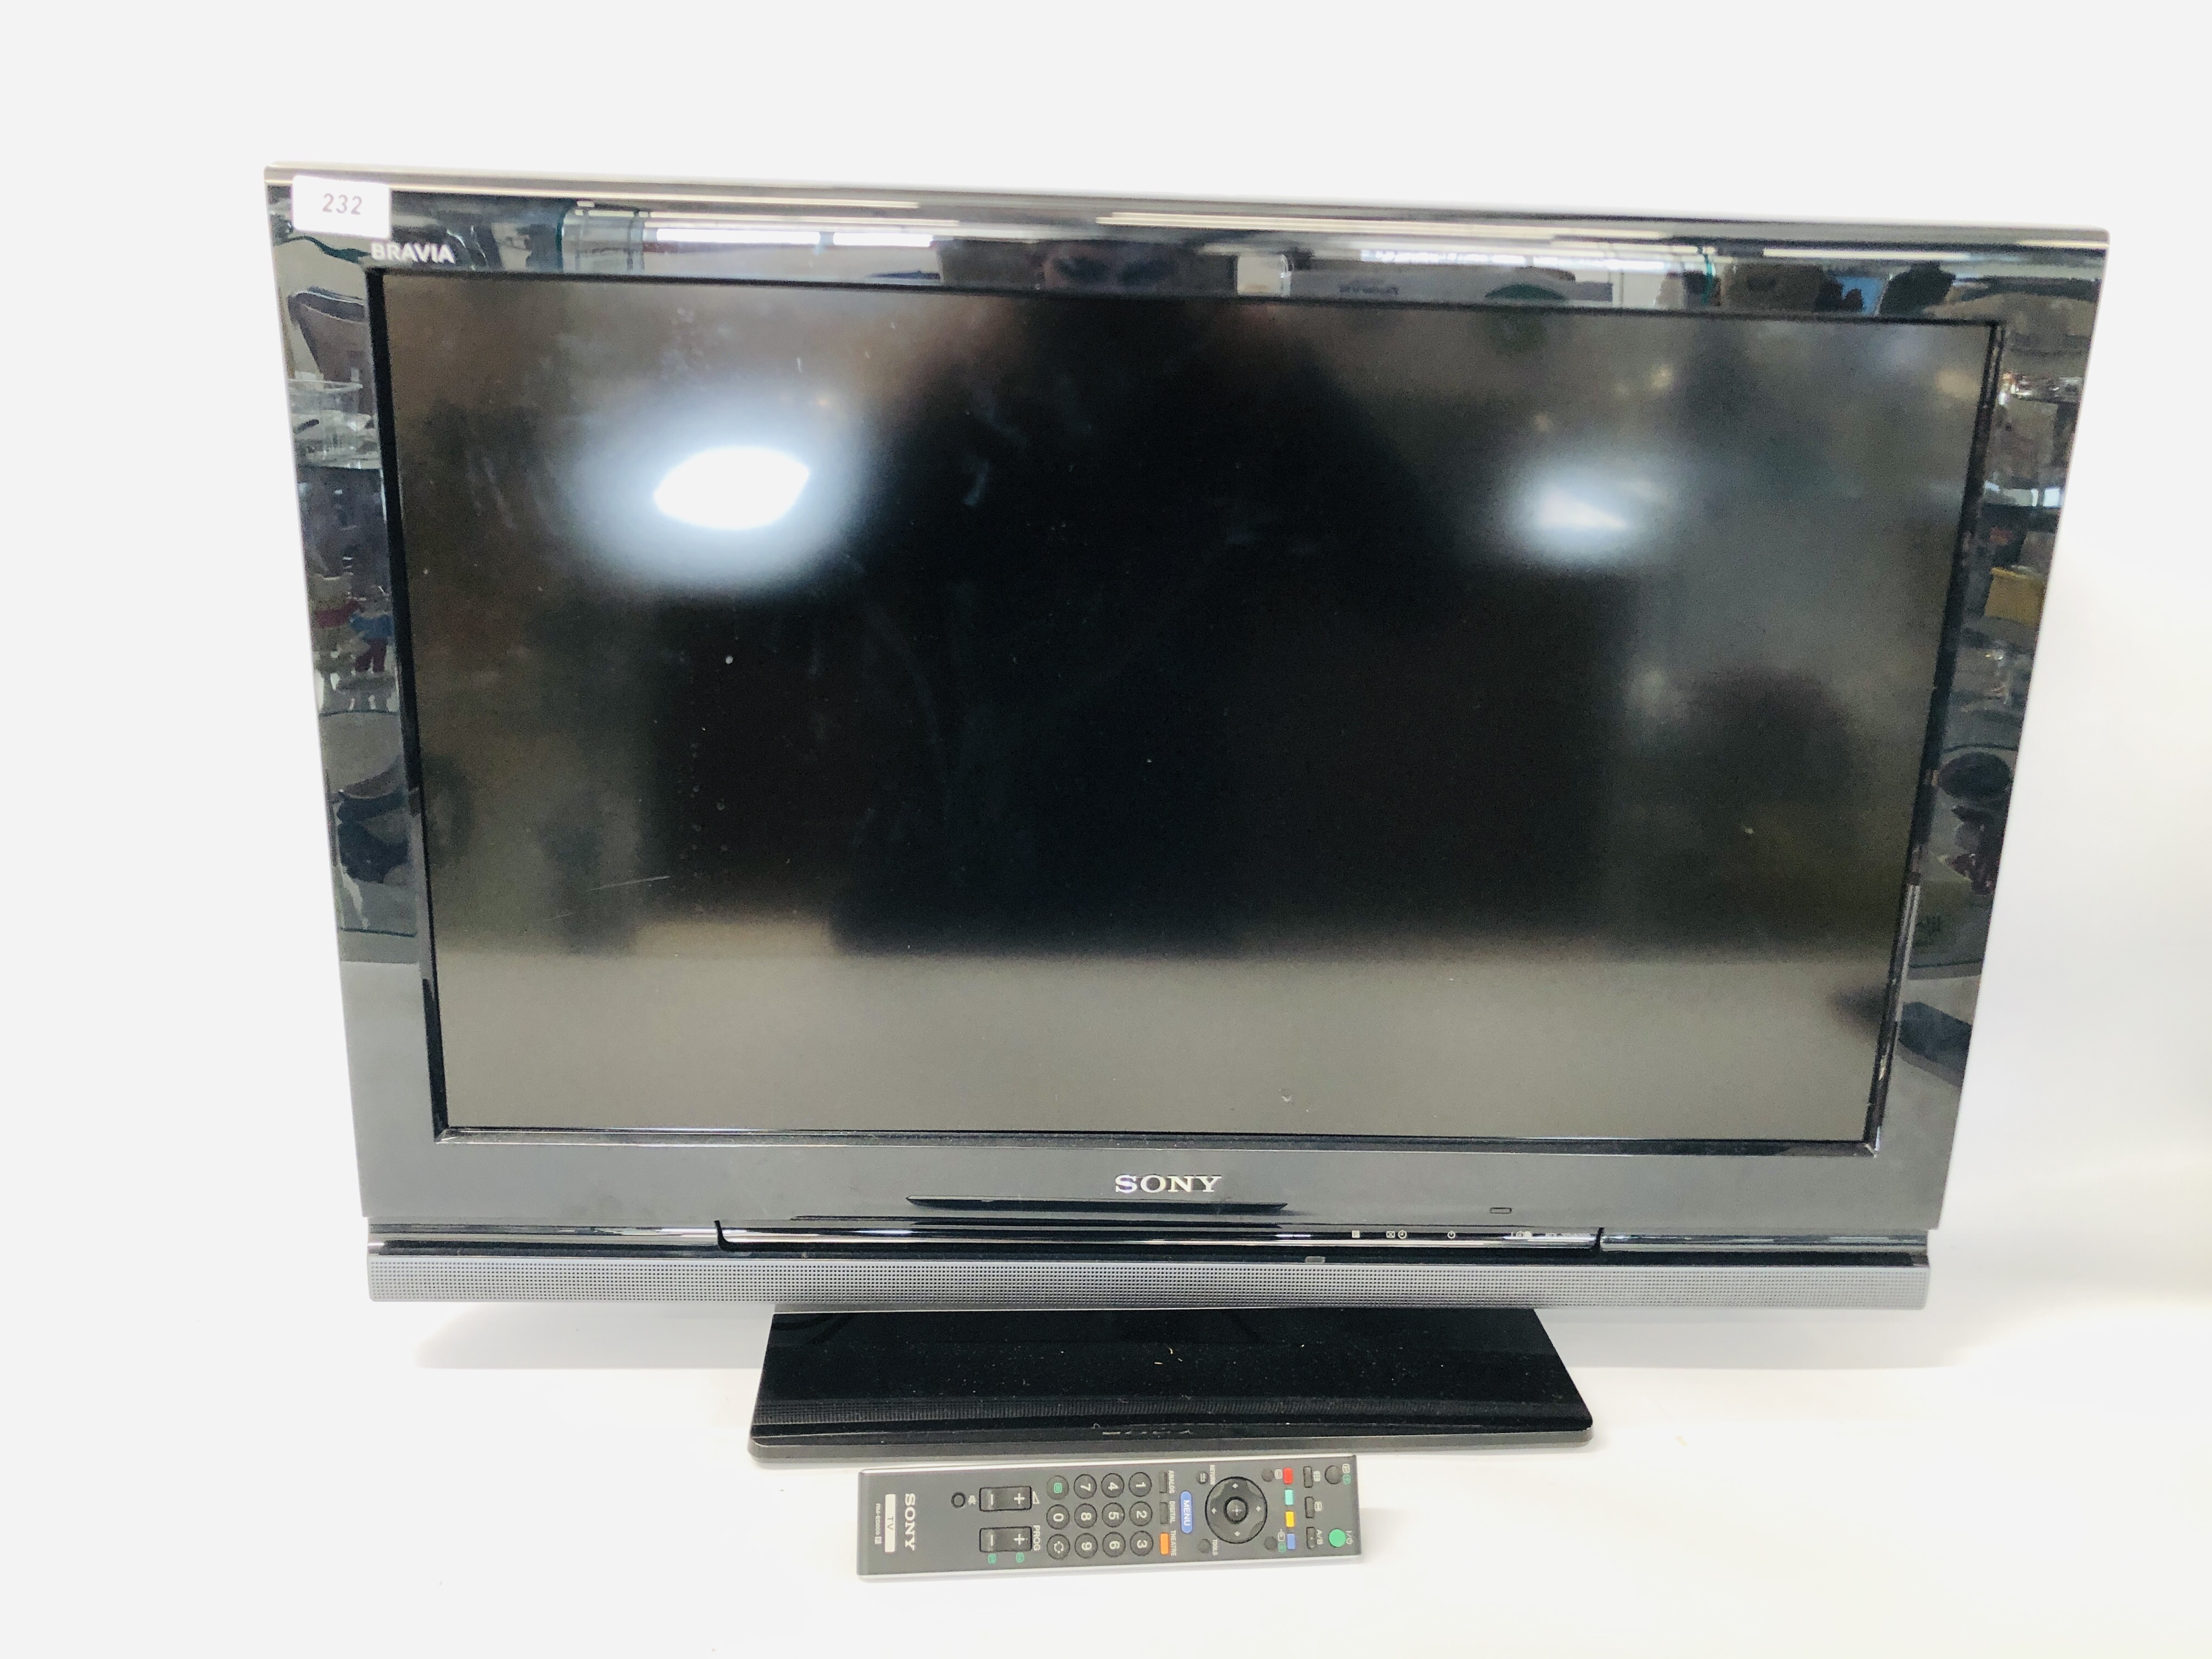 A SONY 32 INCH FLAT SCREEN TV COMPLETE WITH REMOTE - SOLD AS SEEN.